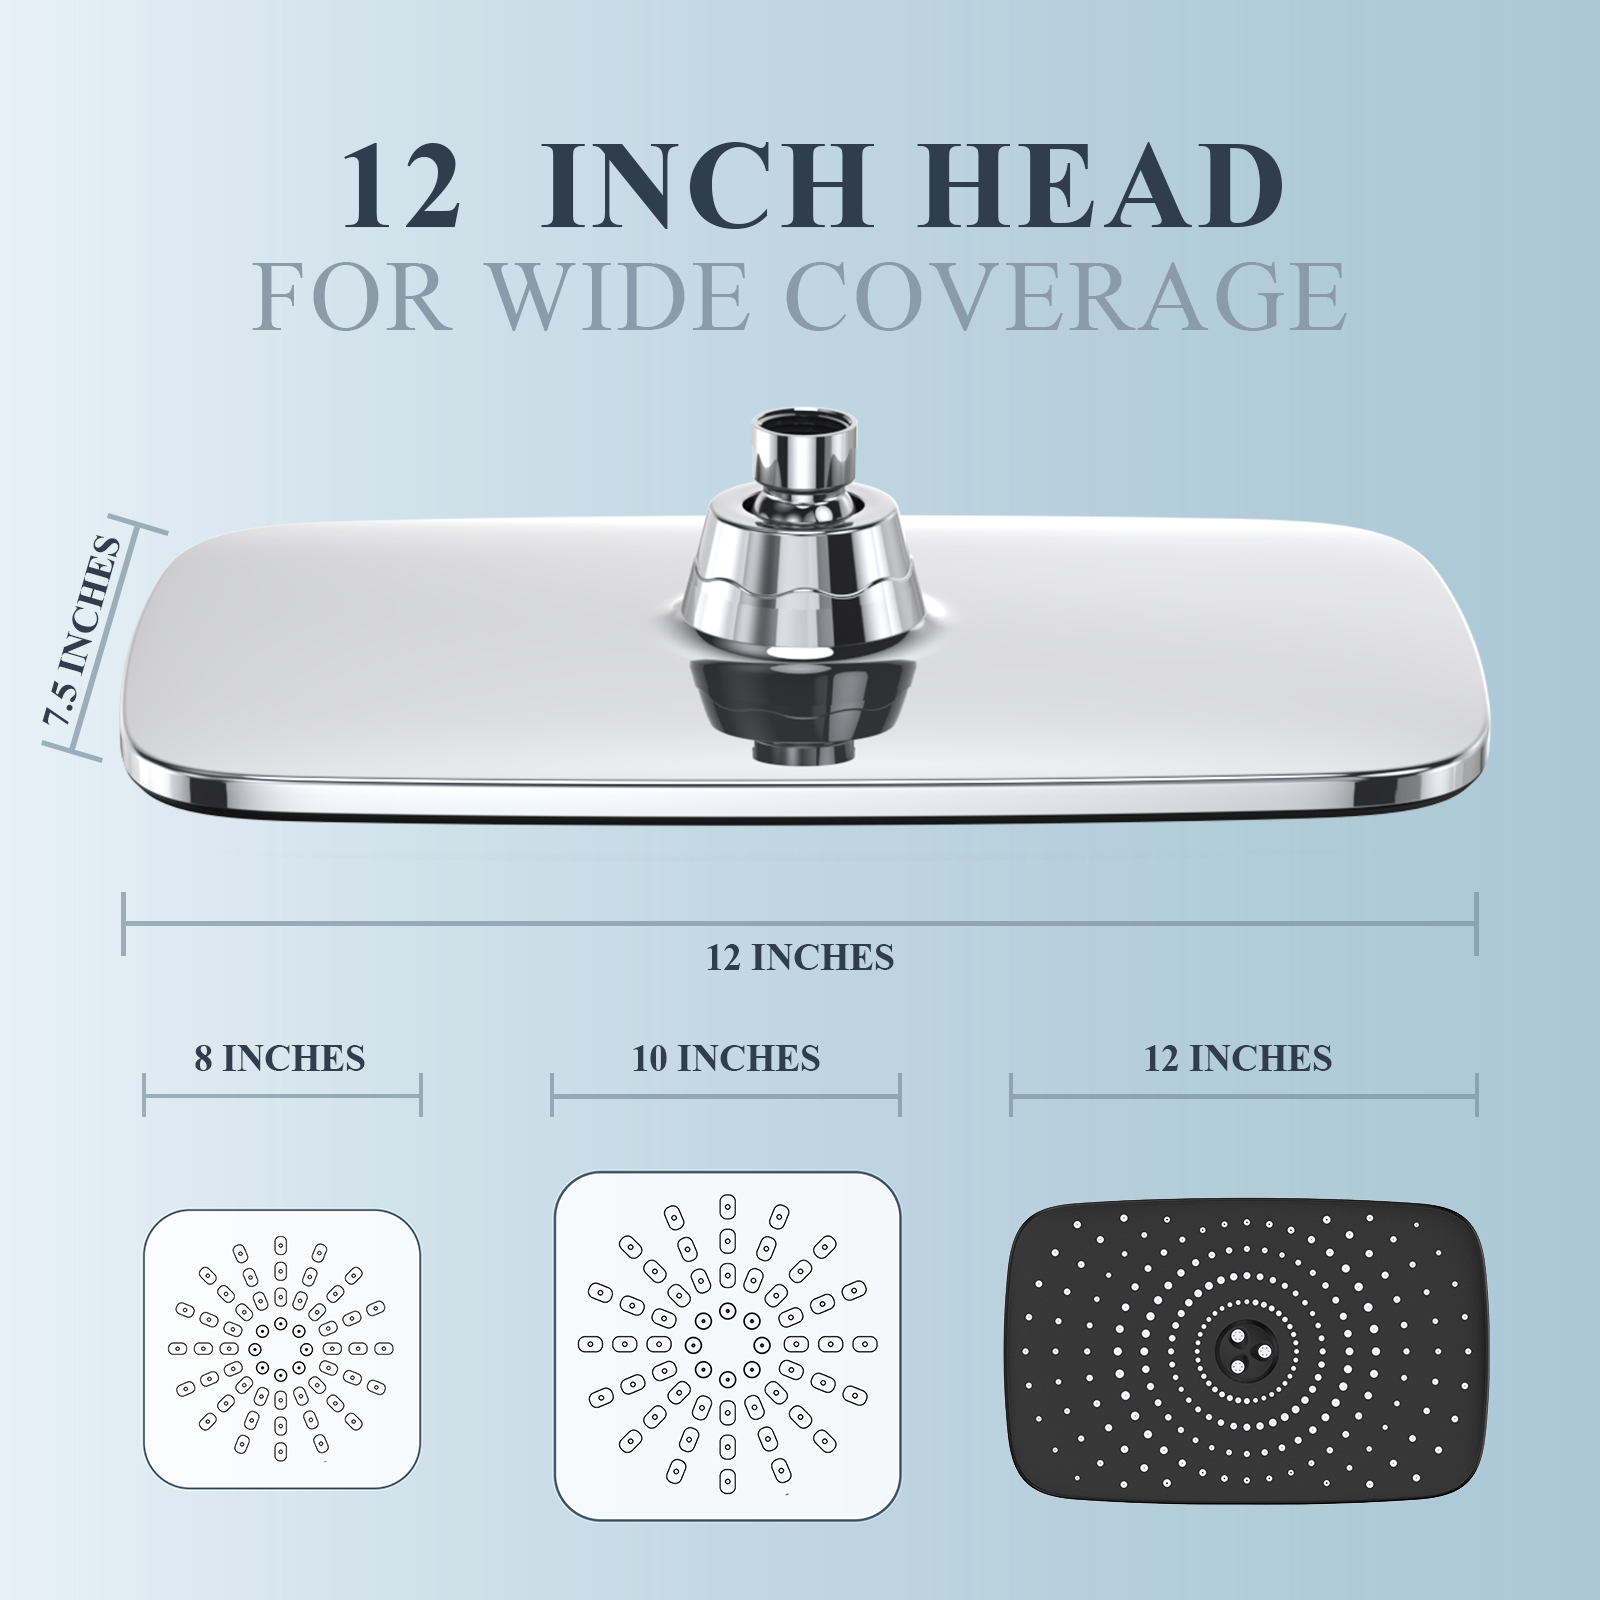 Ophanie 5-Setting High Pressure Shower Head, 12 inch Rain Shower Head with Handheld and Hose, Chrome - image 5 of 10